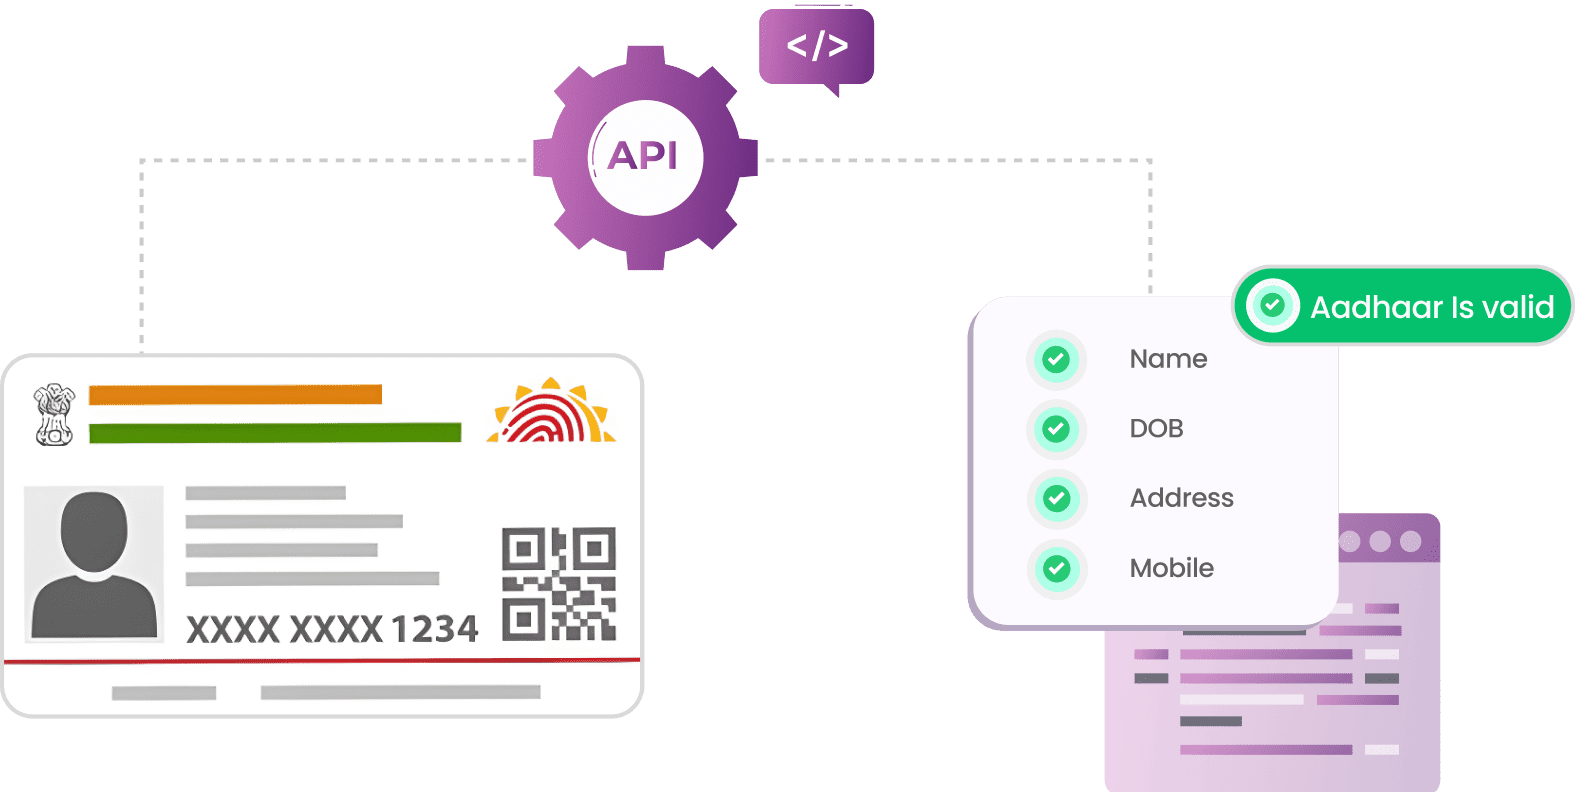 Image showing the process of Aadhaar validation via an API. The Aadhaar card image connects to a checklist with name, DOB, address, and mobile number marked as "valid".